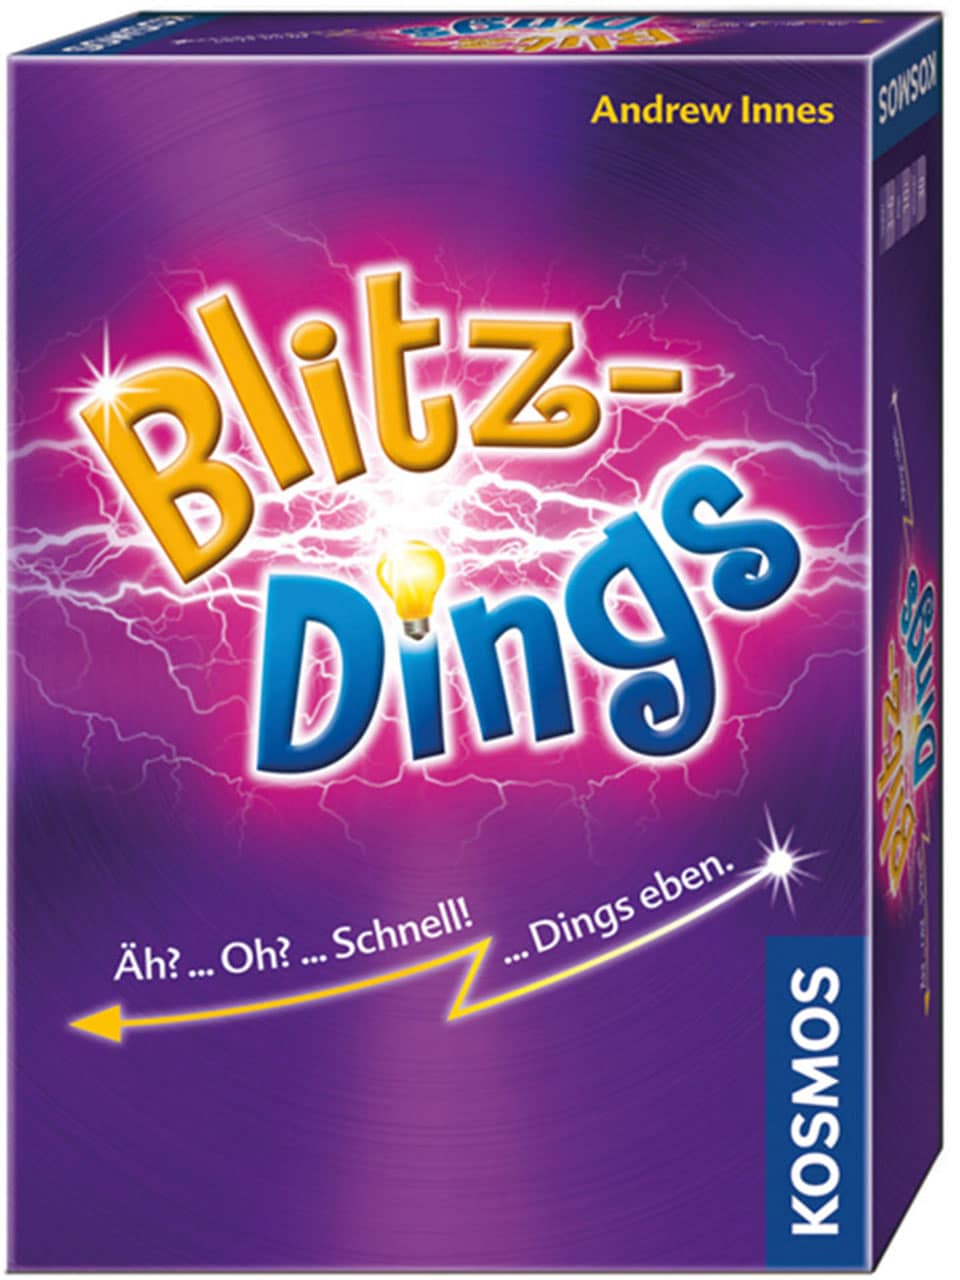 Kosmos Spiel »Blitzdings«, Made in Germany